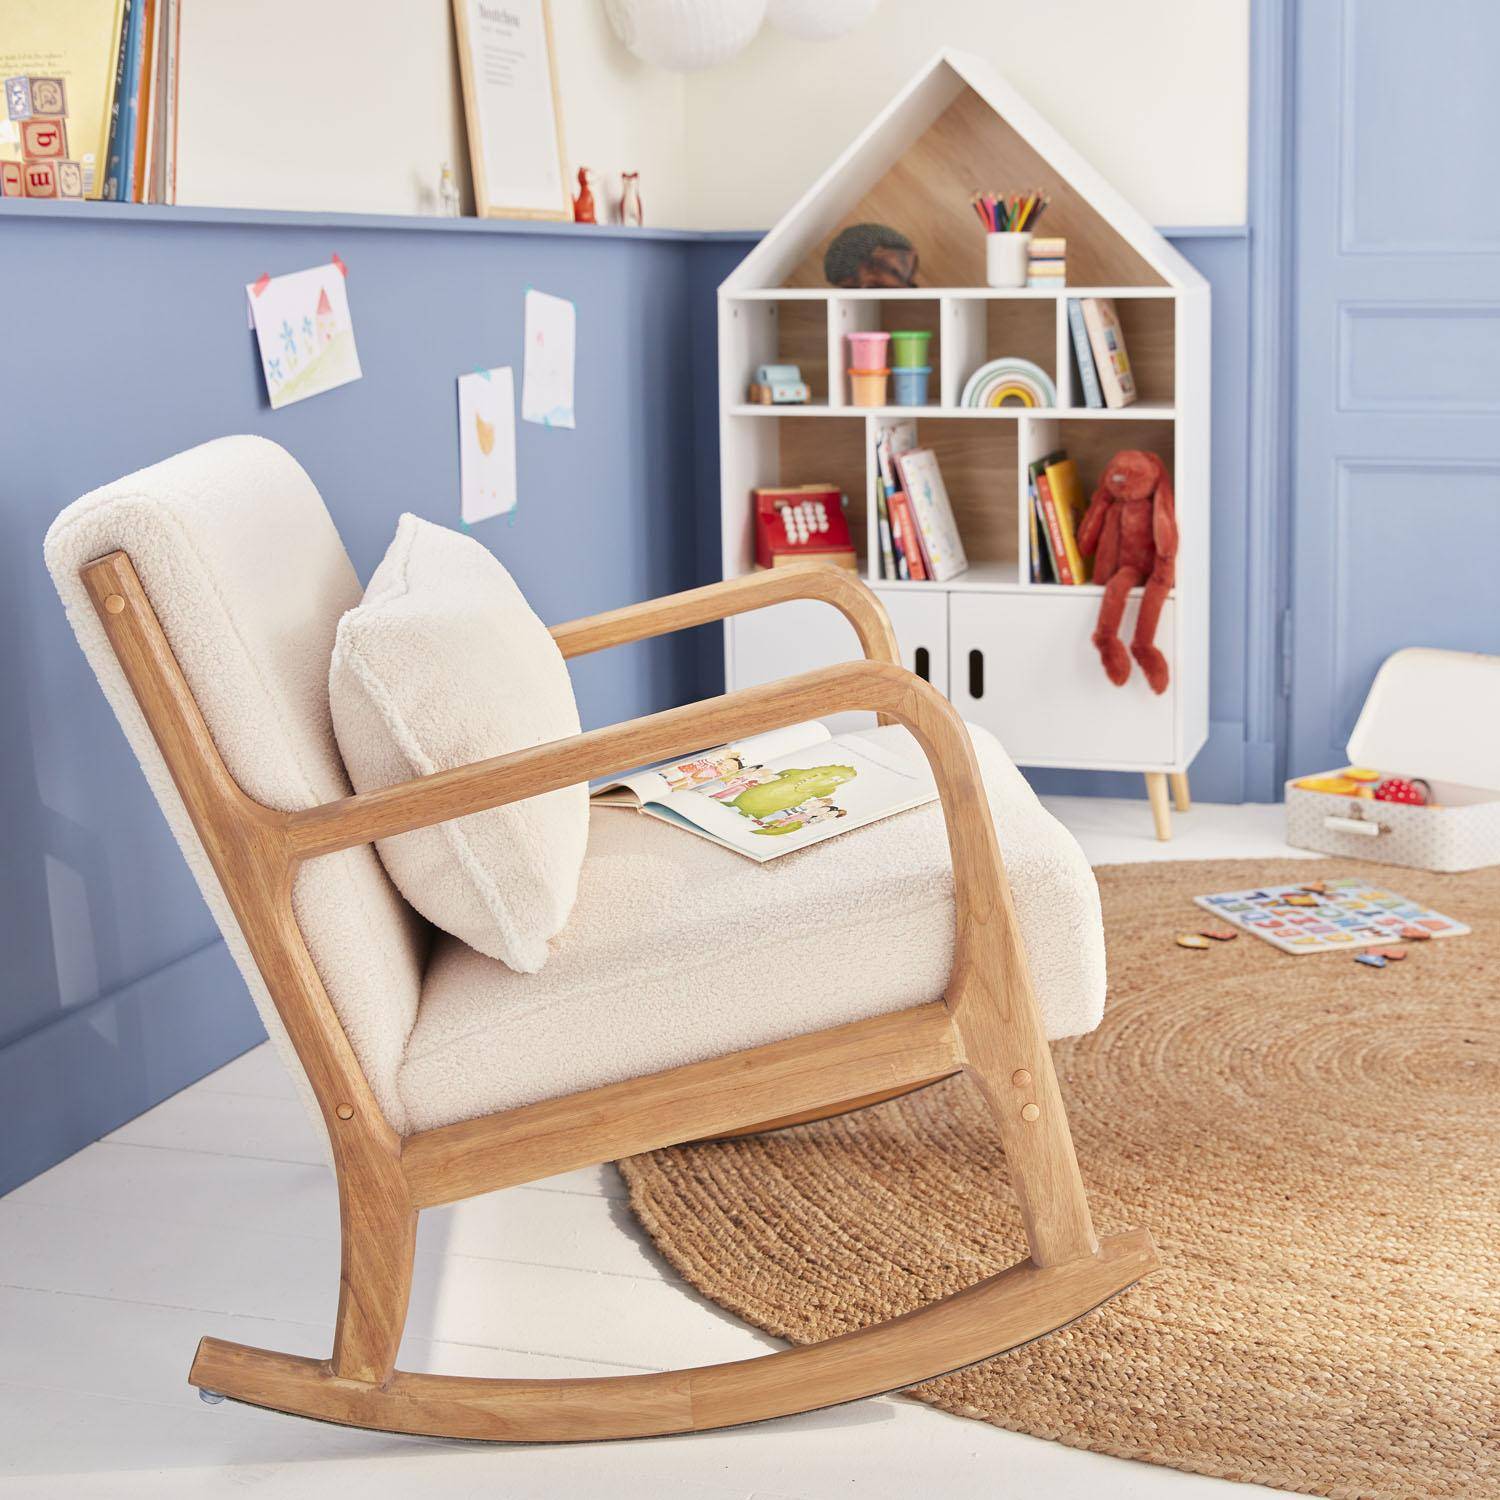 Children's house-shaped bookcase - 3 shelves, 8 compartments, 2 cupboards, Scandi-style - Tobias - Natural pine, White,sweeek,Photo2